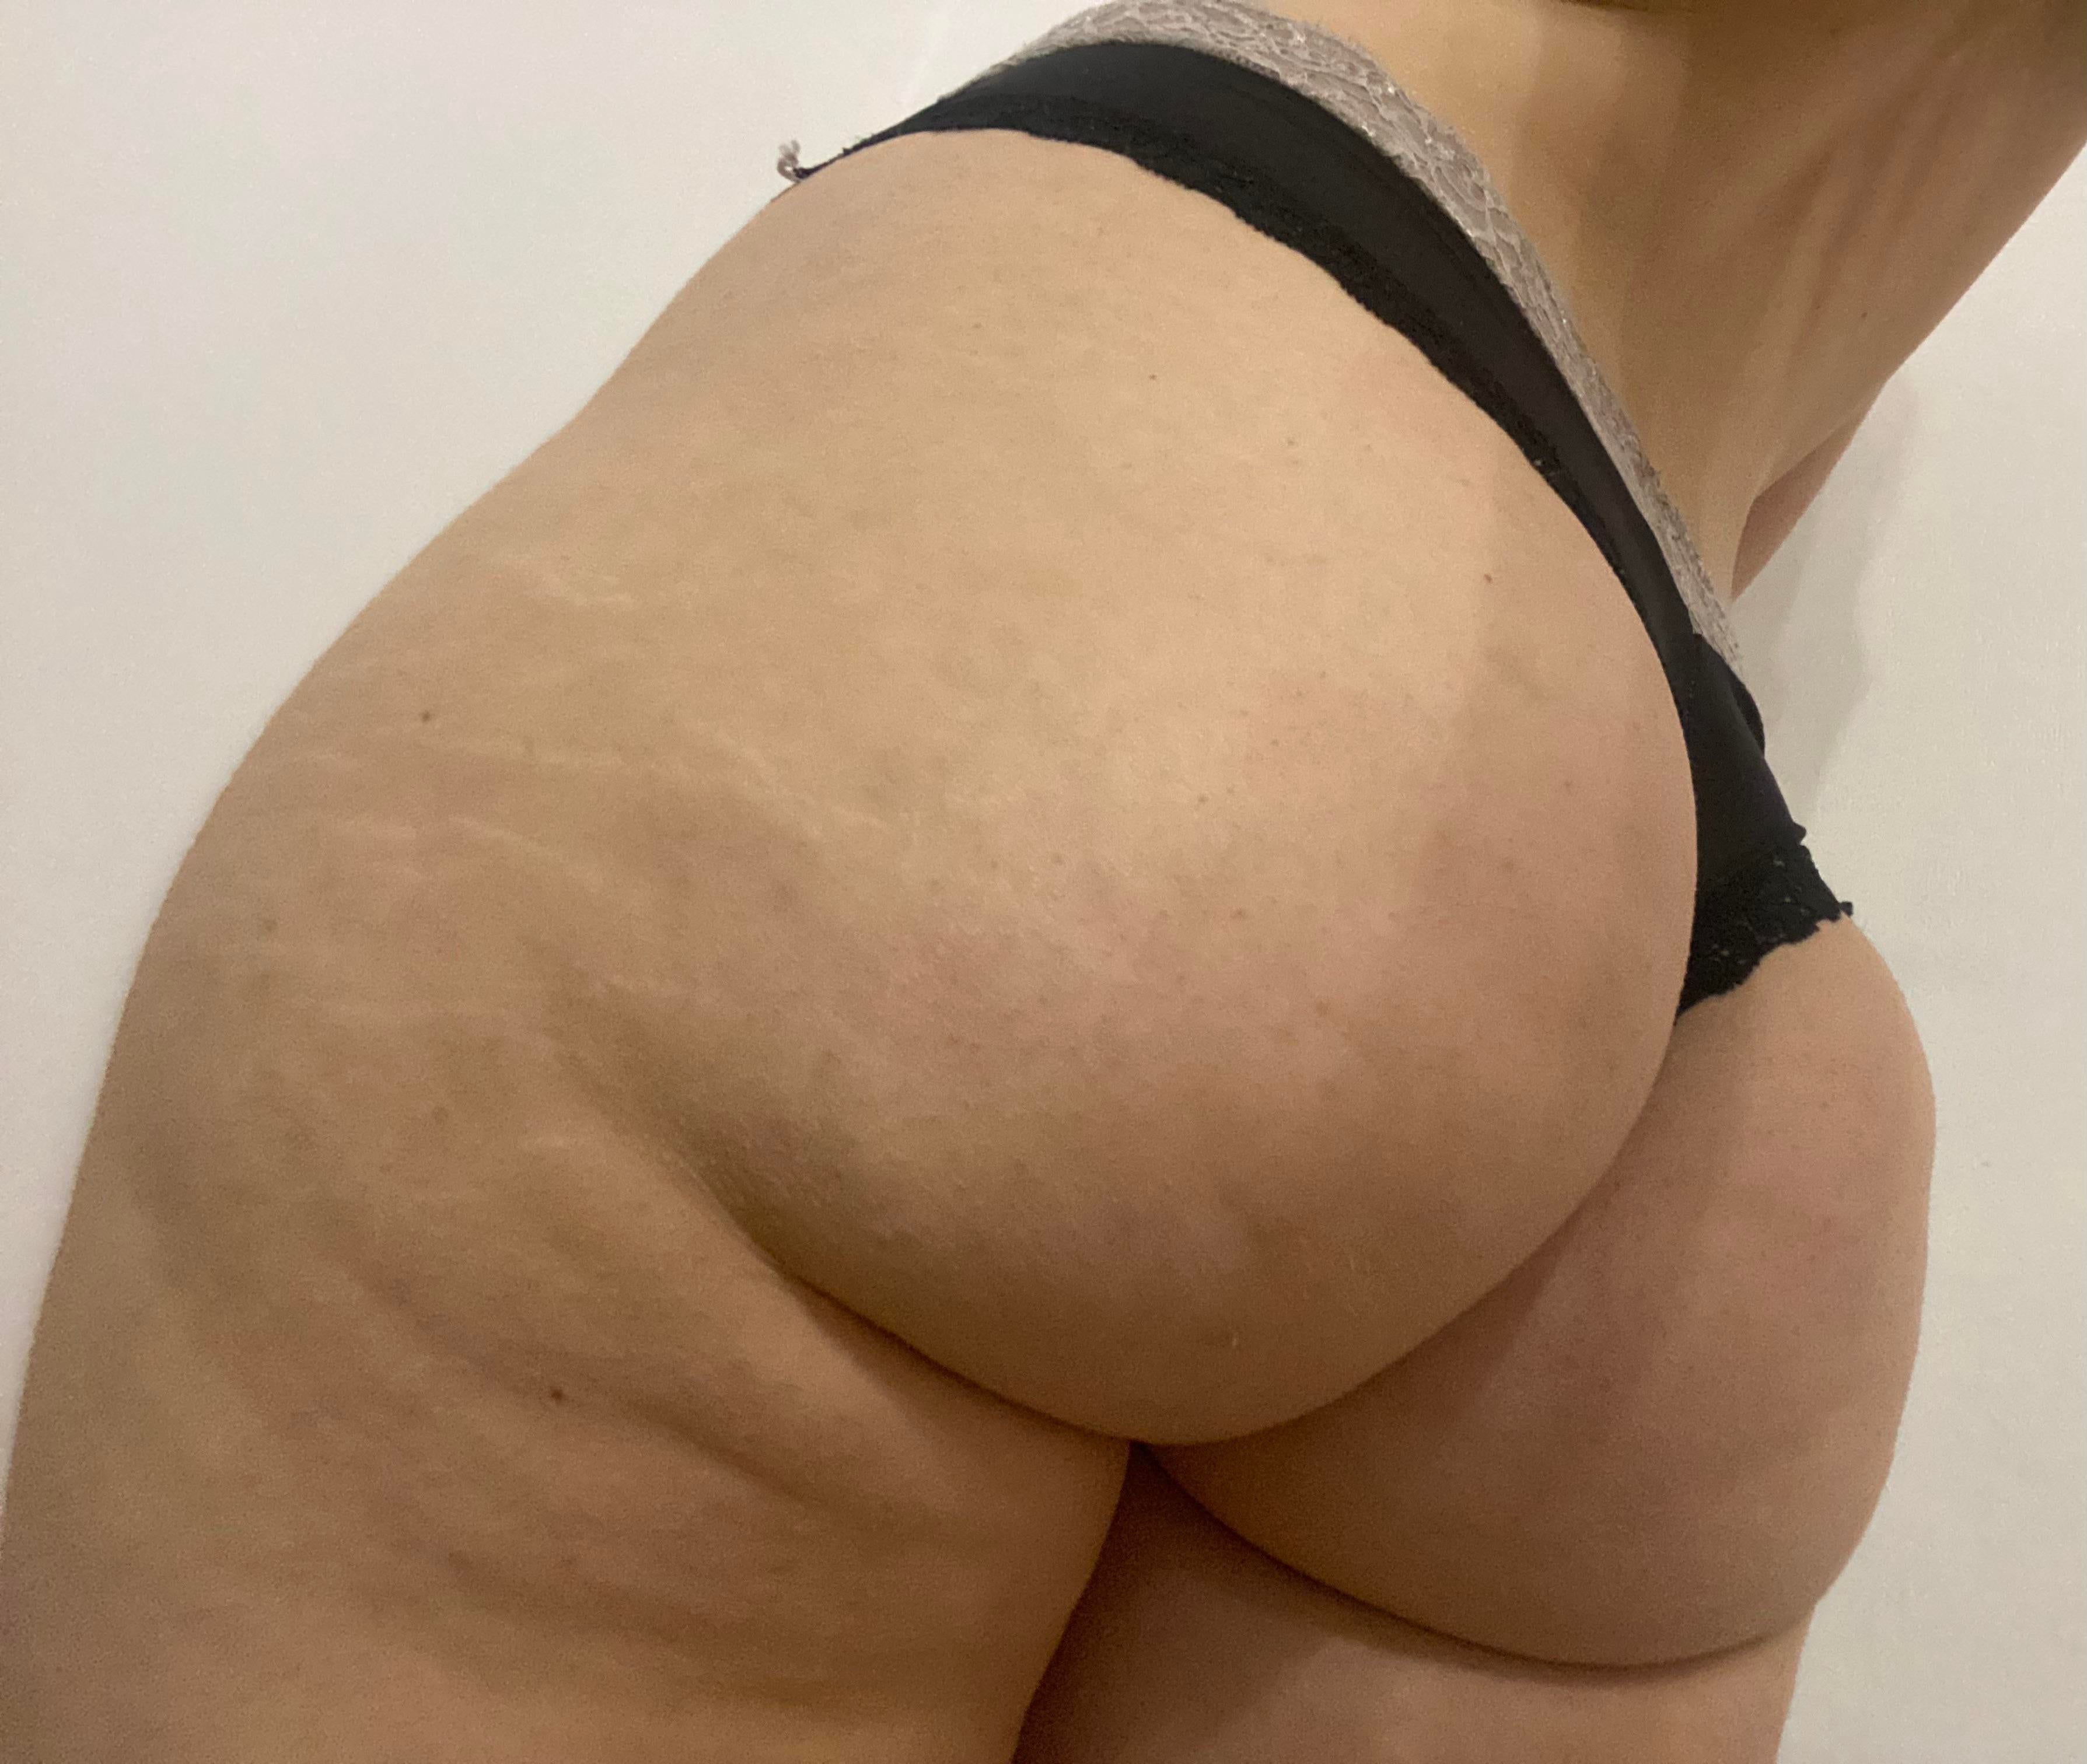 Can someone appreciate this fat ass Thick White Girls